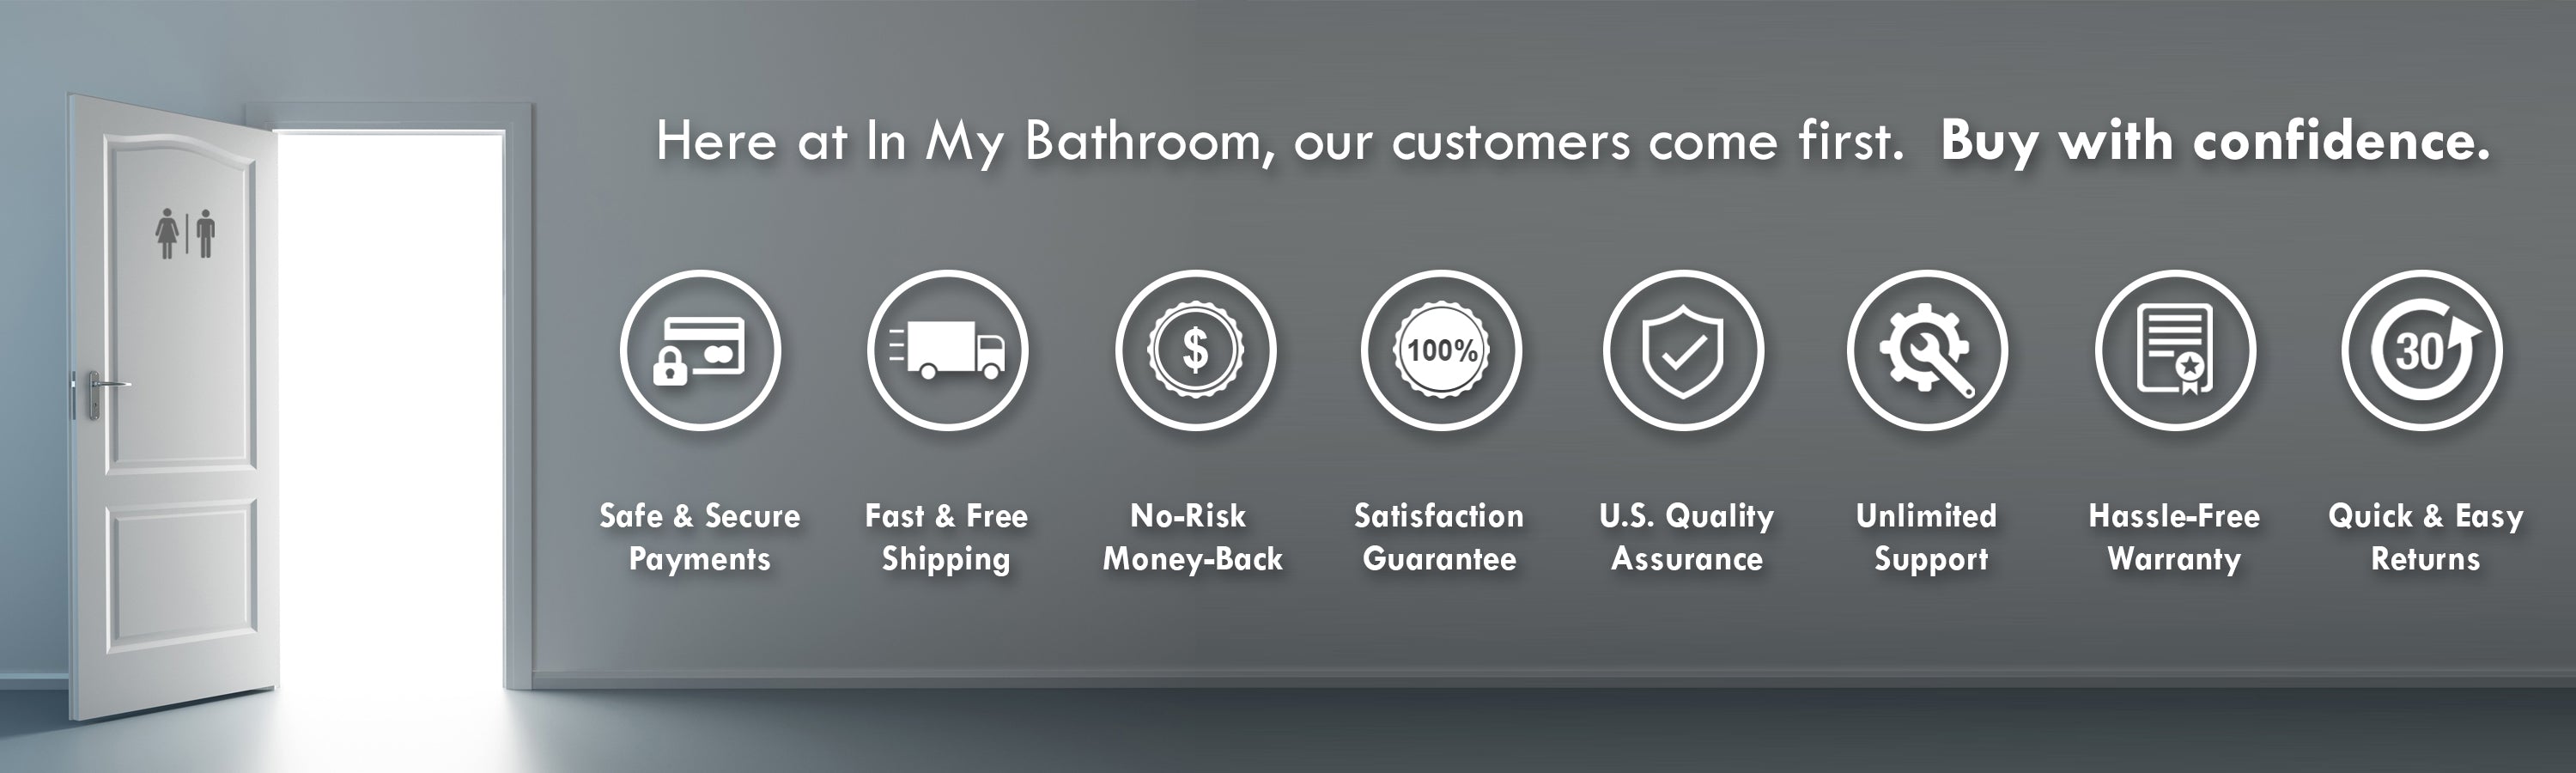 In My Bathroom (IMB) - Butt Buddy - Bidet Toilet Attachment - BBB - Customers Come First - Free Shipping - Safe Payments - Warranty - Money-Back - Satisfaction Guaranteed - U.S. - USA - Support - QA - Easy Returns - Buy With Confidence